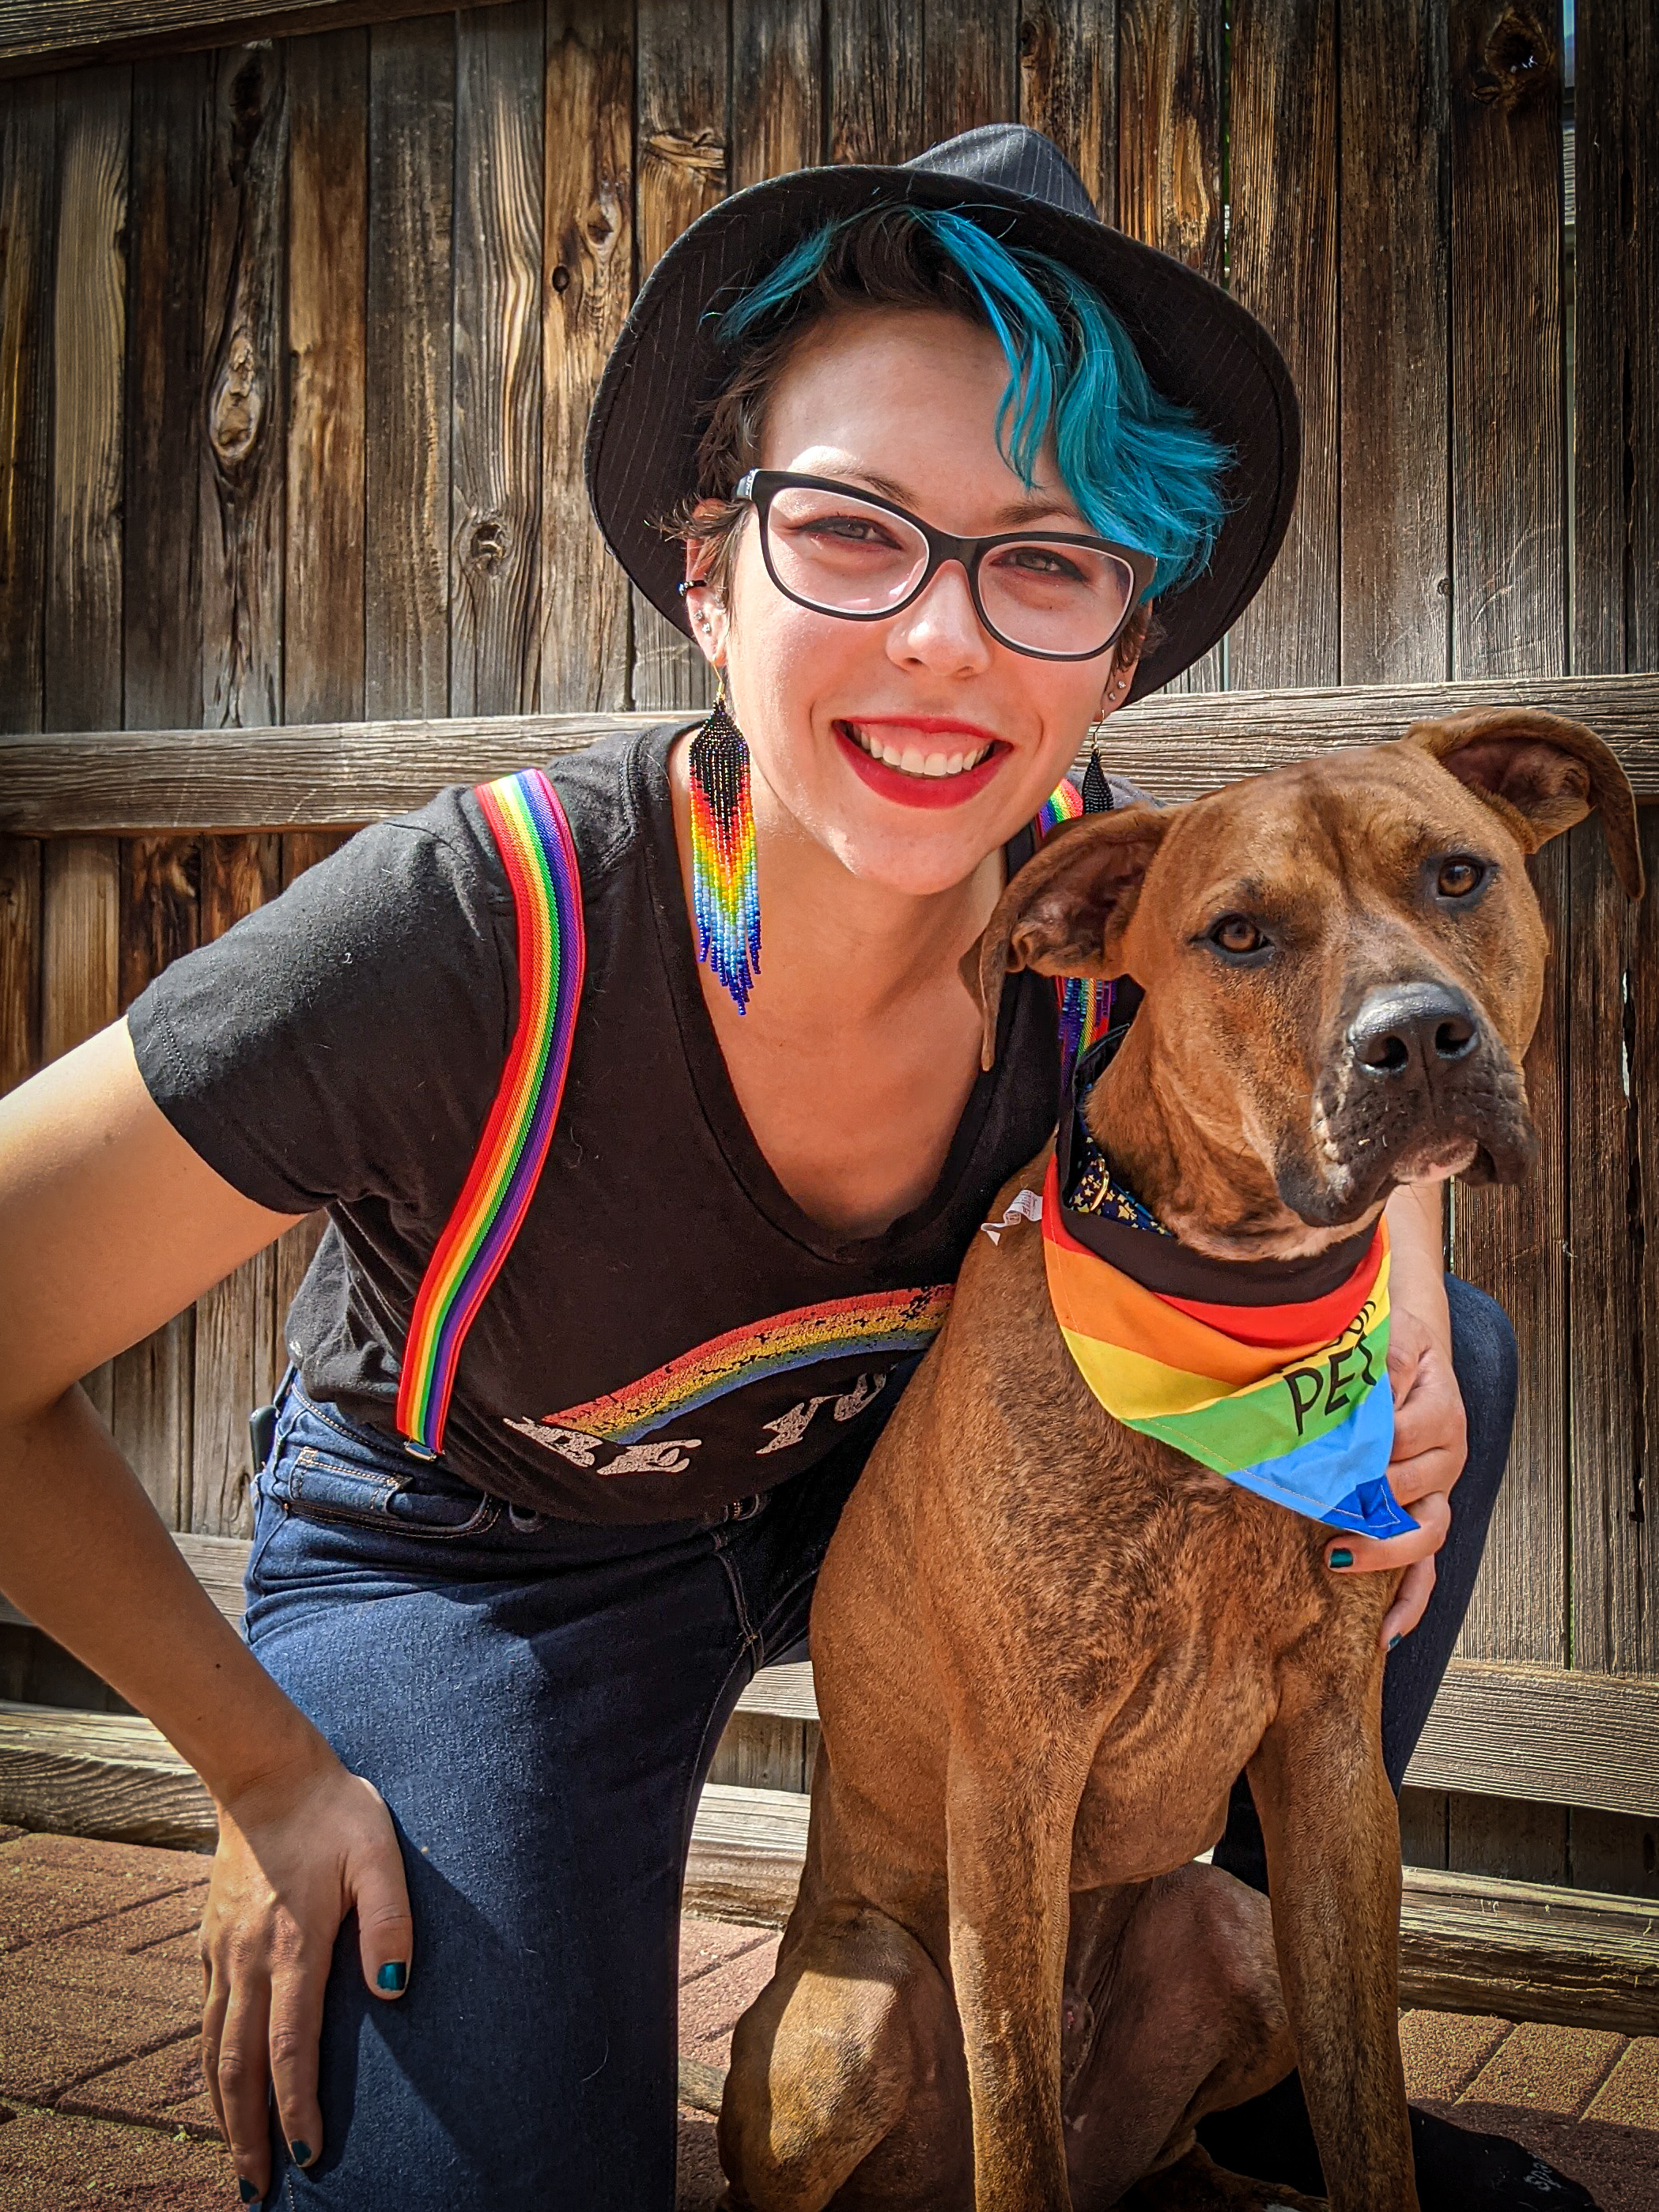 [Image description: Photo of Jacenta L. Irlanda crouched in front of a wooden fence. She is smiling at the camera with a large mutt dog. She is wearing a black t-shirt, blue jeans, rainbow suspenders, and a black fedora atop her cool blue-dyed hair. The dog is wearing a rainbow bandana around its neck.]